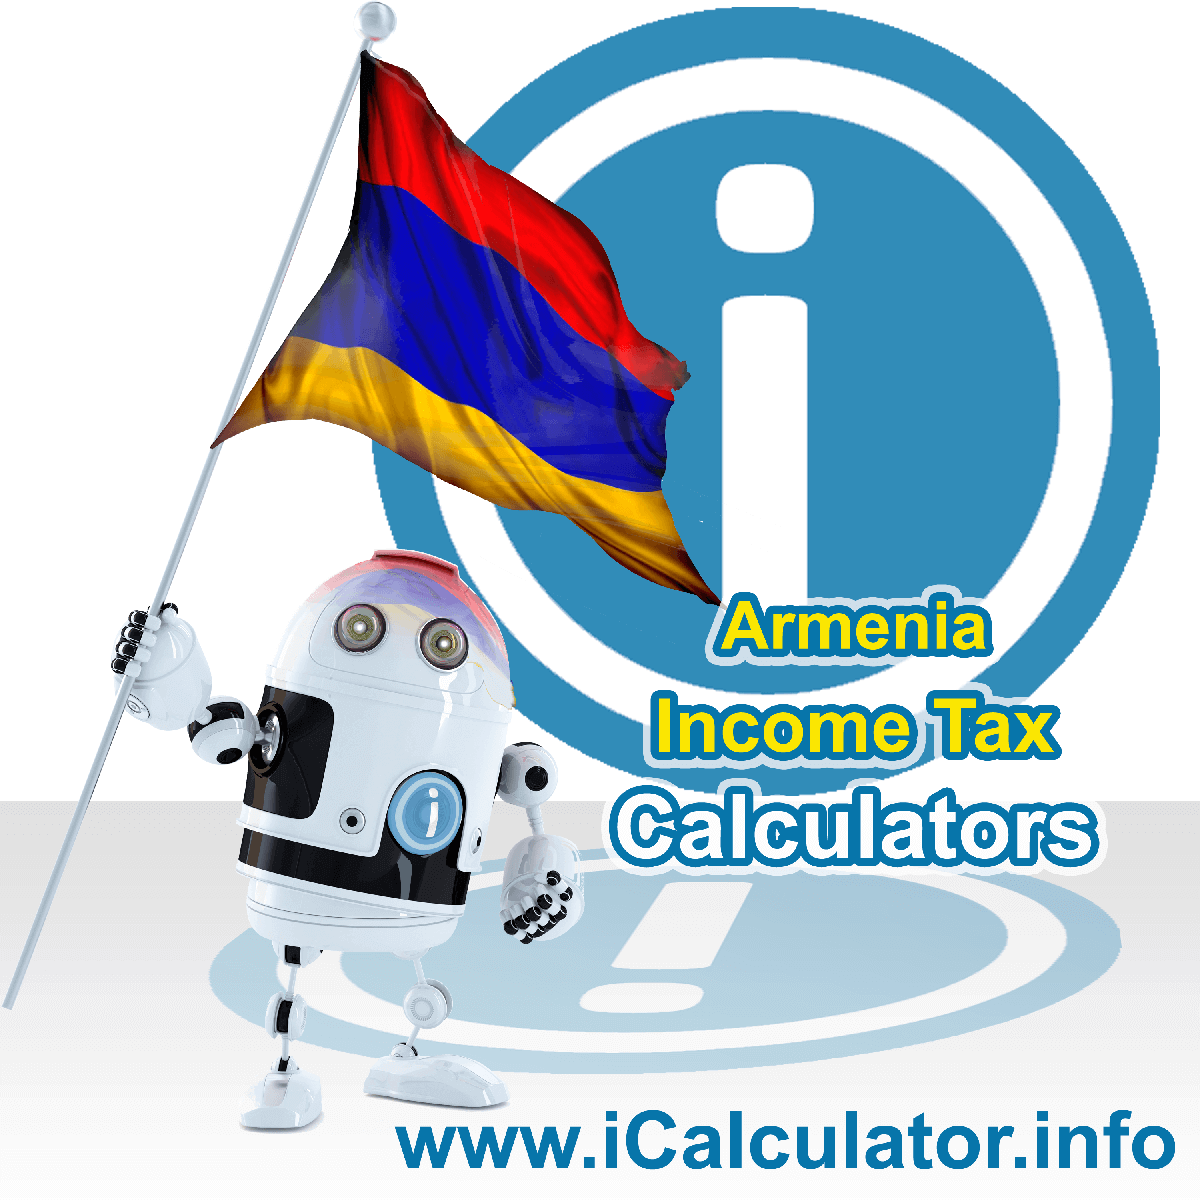 Armenia Income Tax Calculator. This image shows a new employer in Armenia calculating the annual payroll costs based on multiple payroll payments in one year in Armenia using the Armenia income tax calculator to understand their payroll costs in Armenia in 2022